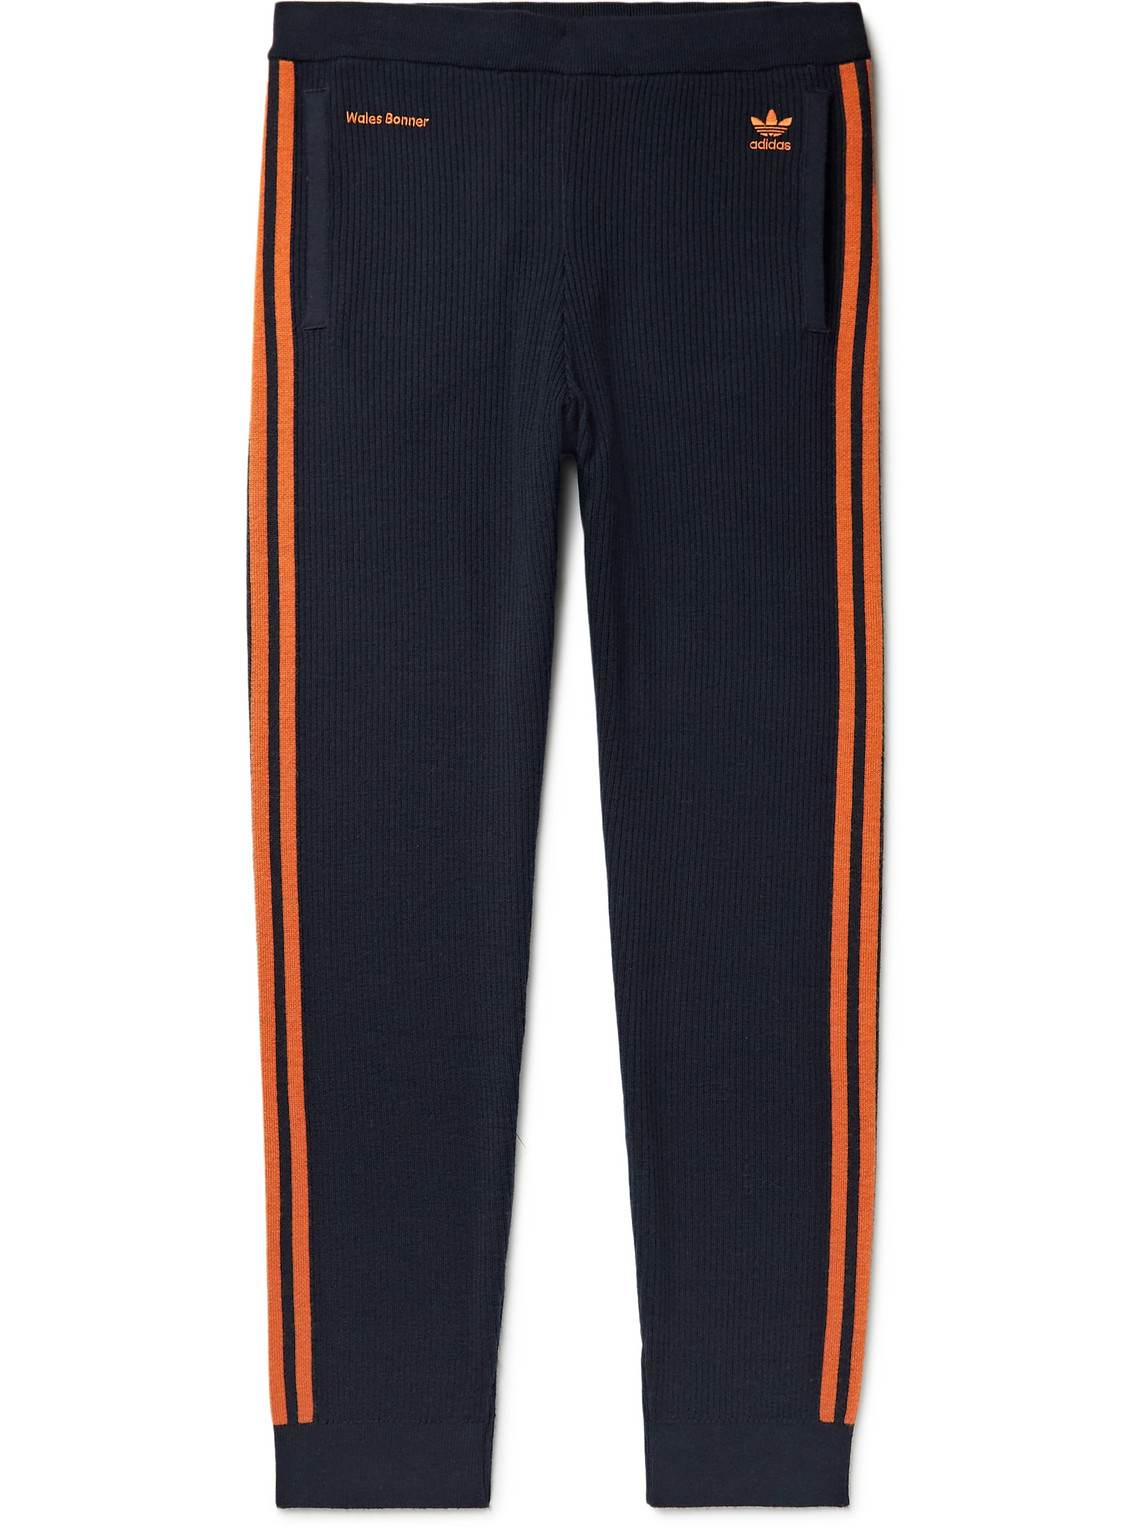 Adidas Consortium Wales Bonner Tapered Striped Ribbed Wool-blend Sweatpants In Blue